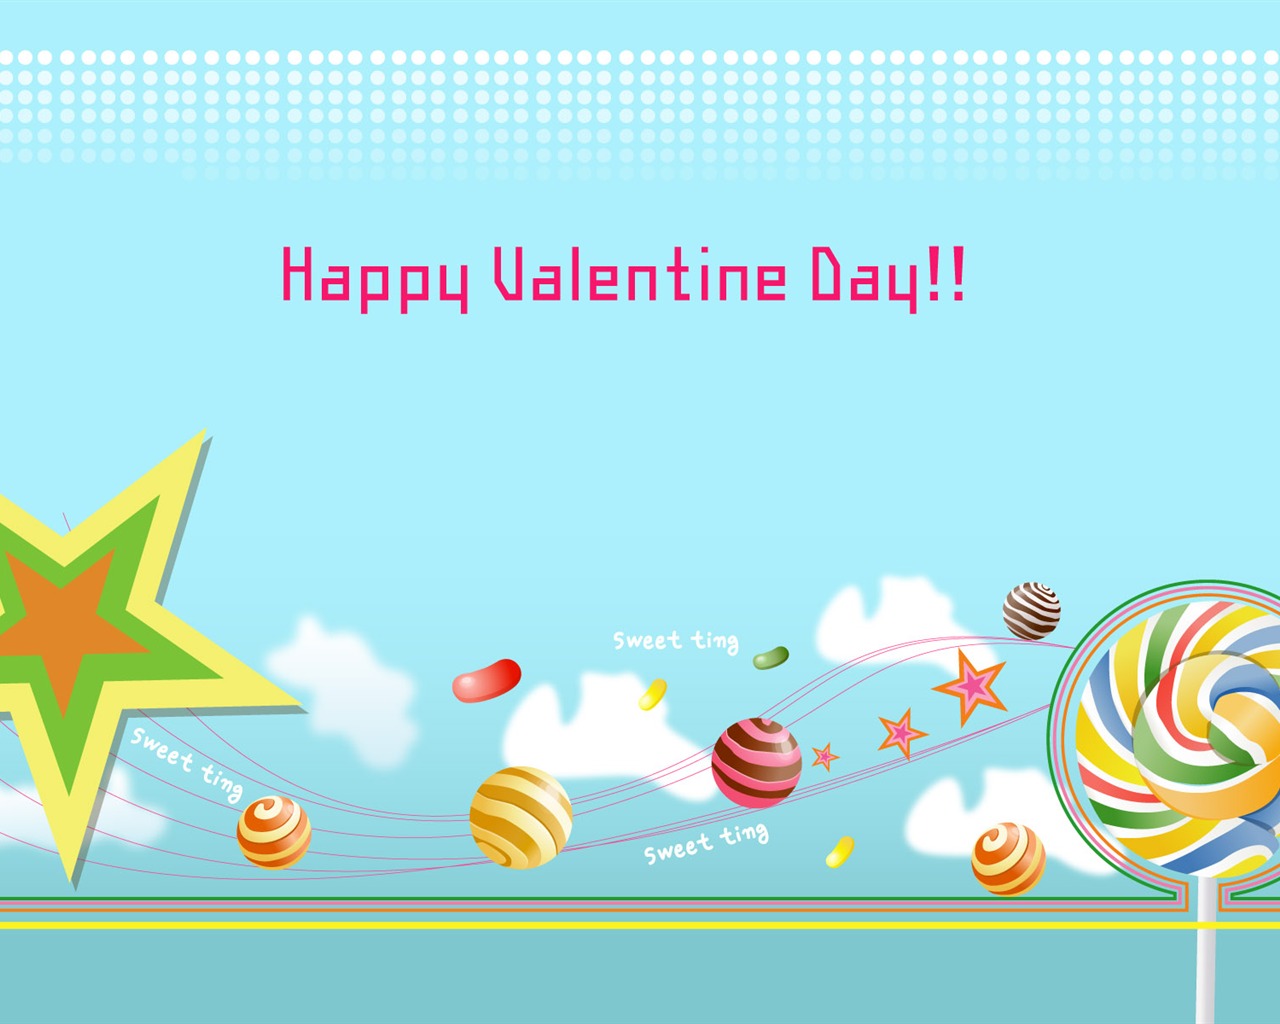 Valentine's Day Love Theme Wallpapers (3) #8 - 1280x1024